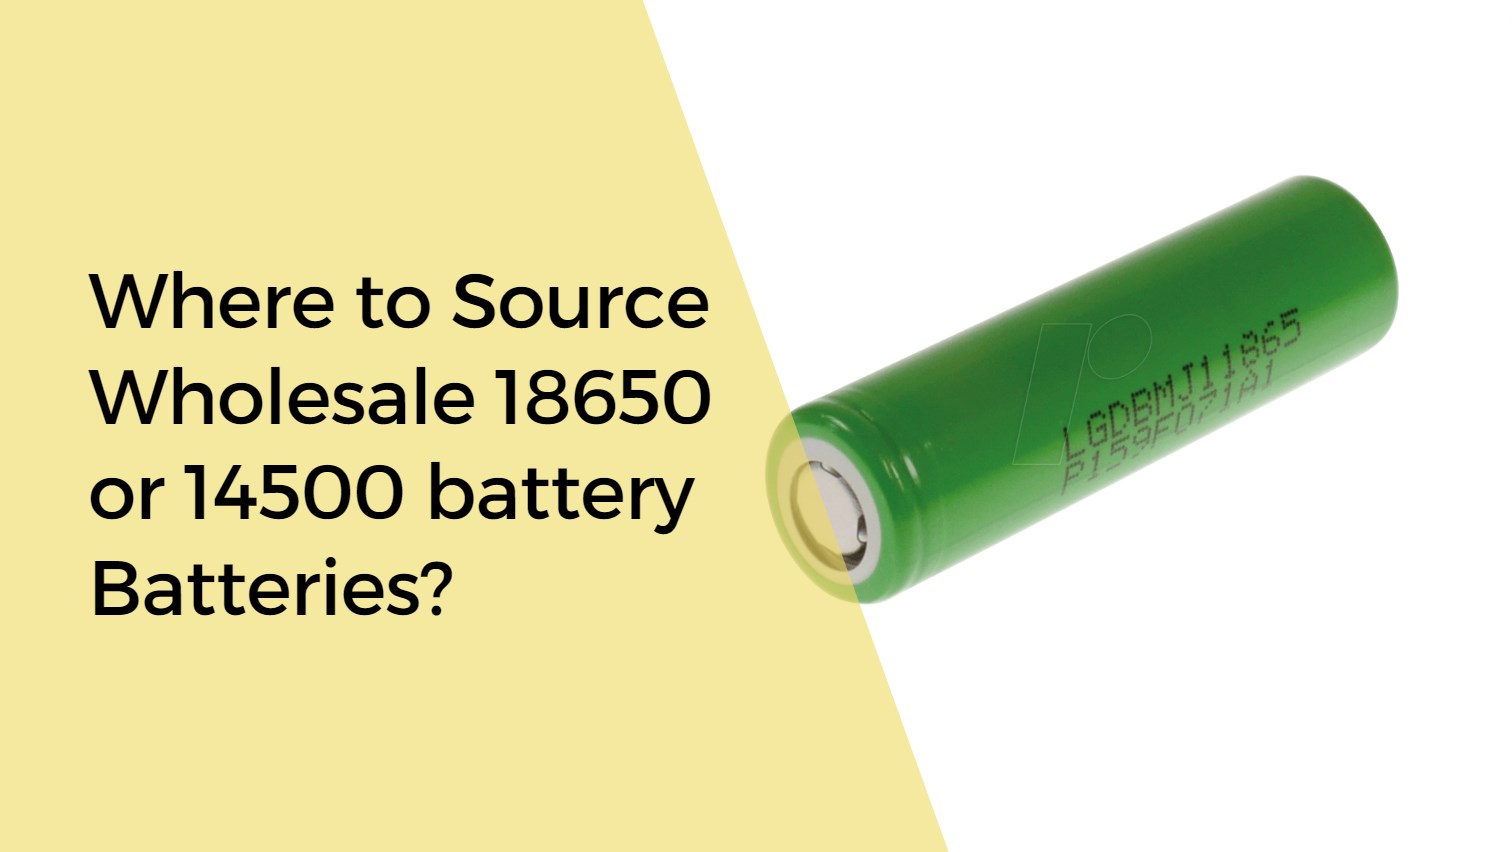 Where to Source Wholesale 18650 or 14500 battery Batteries?